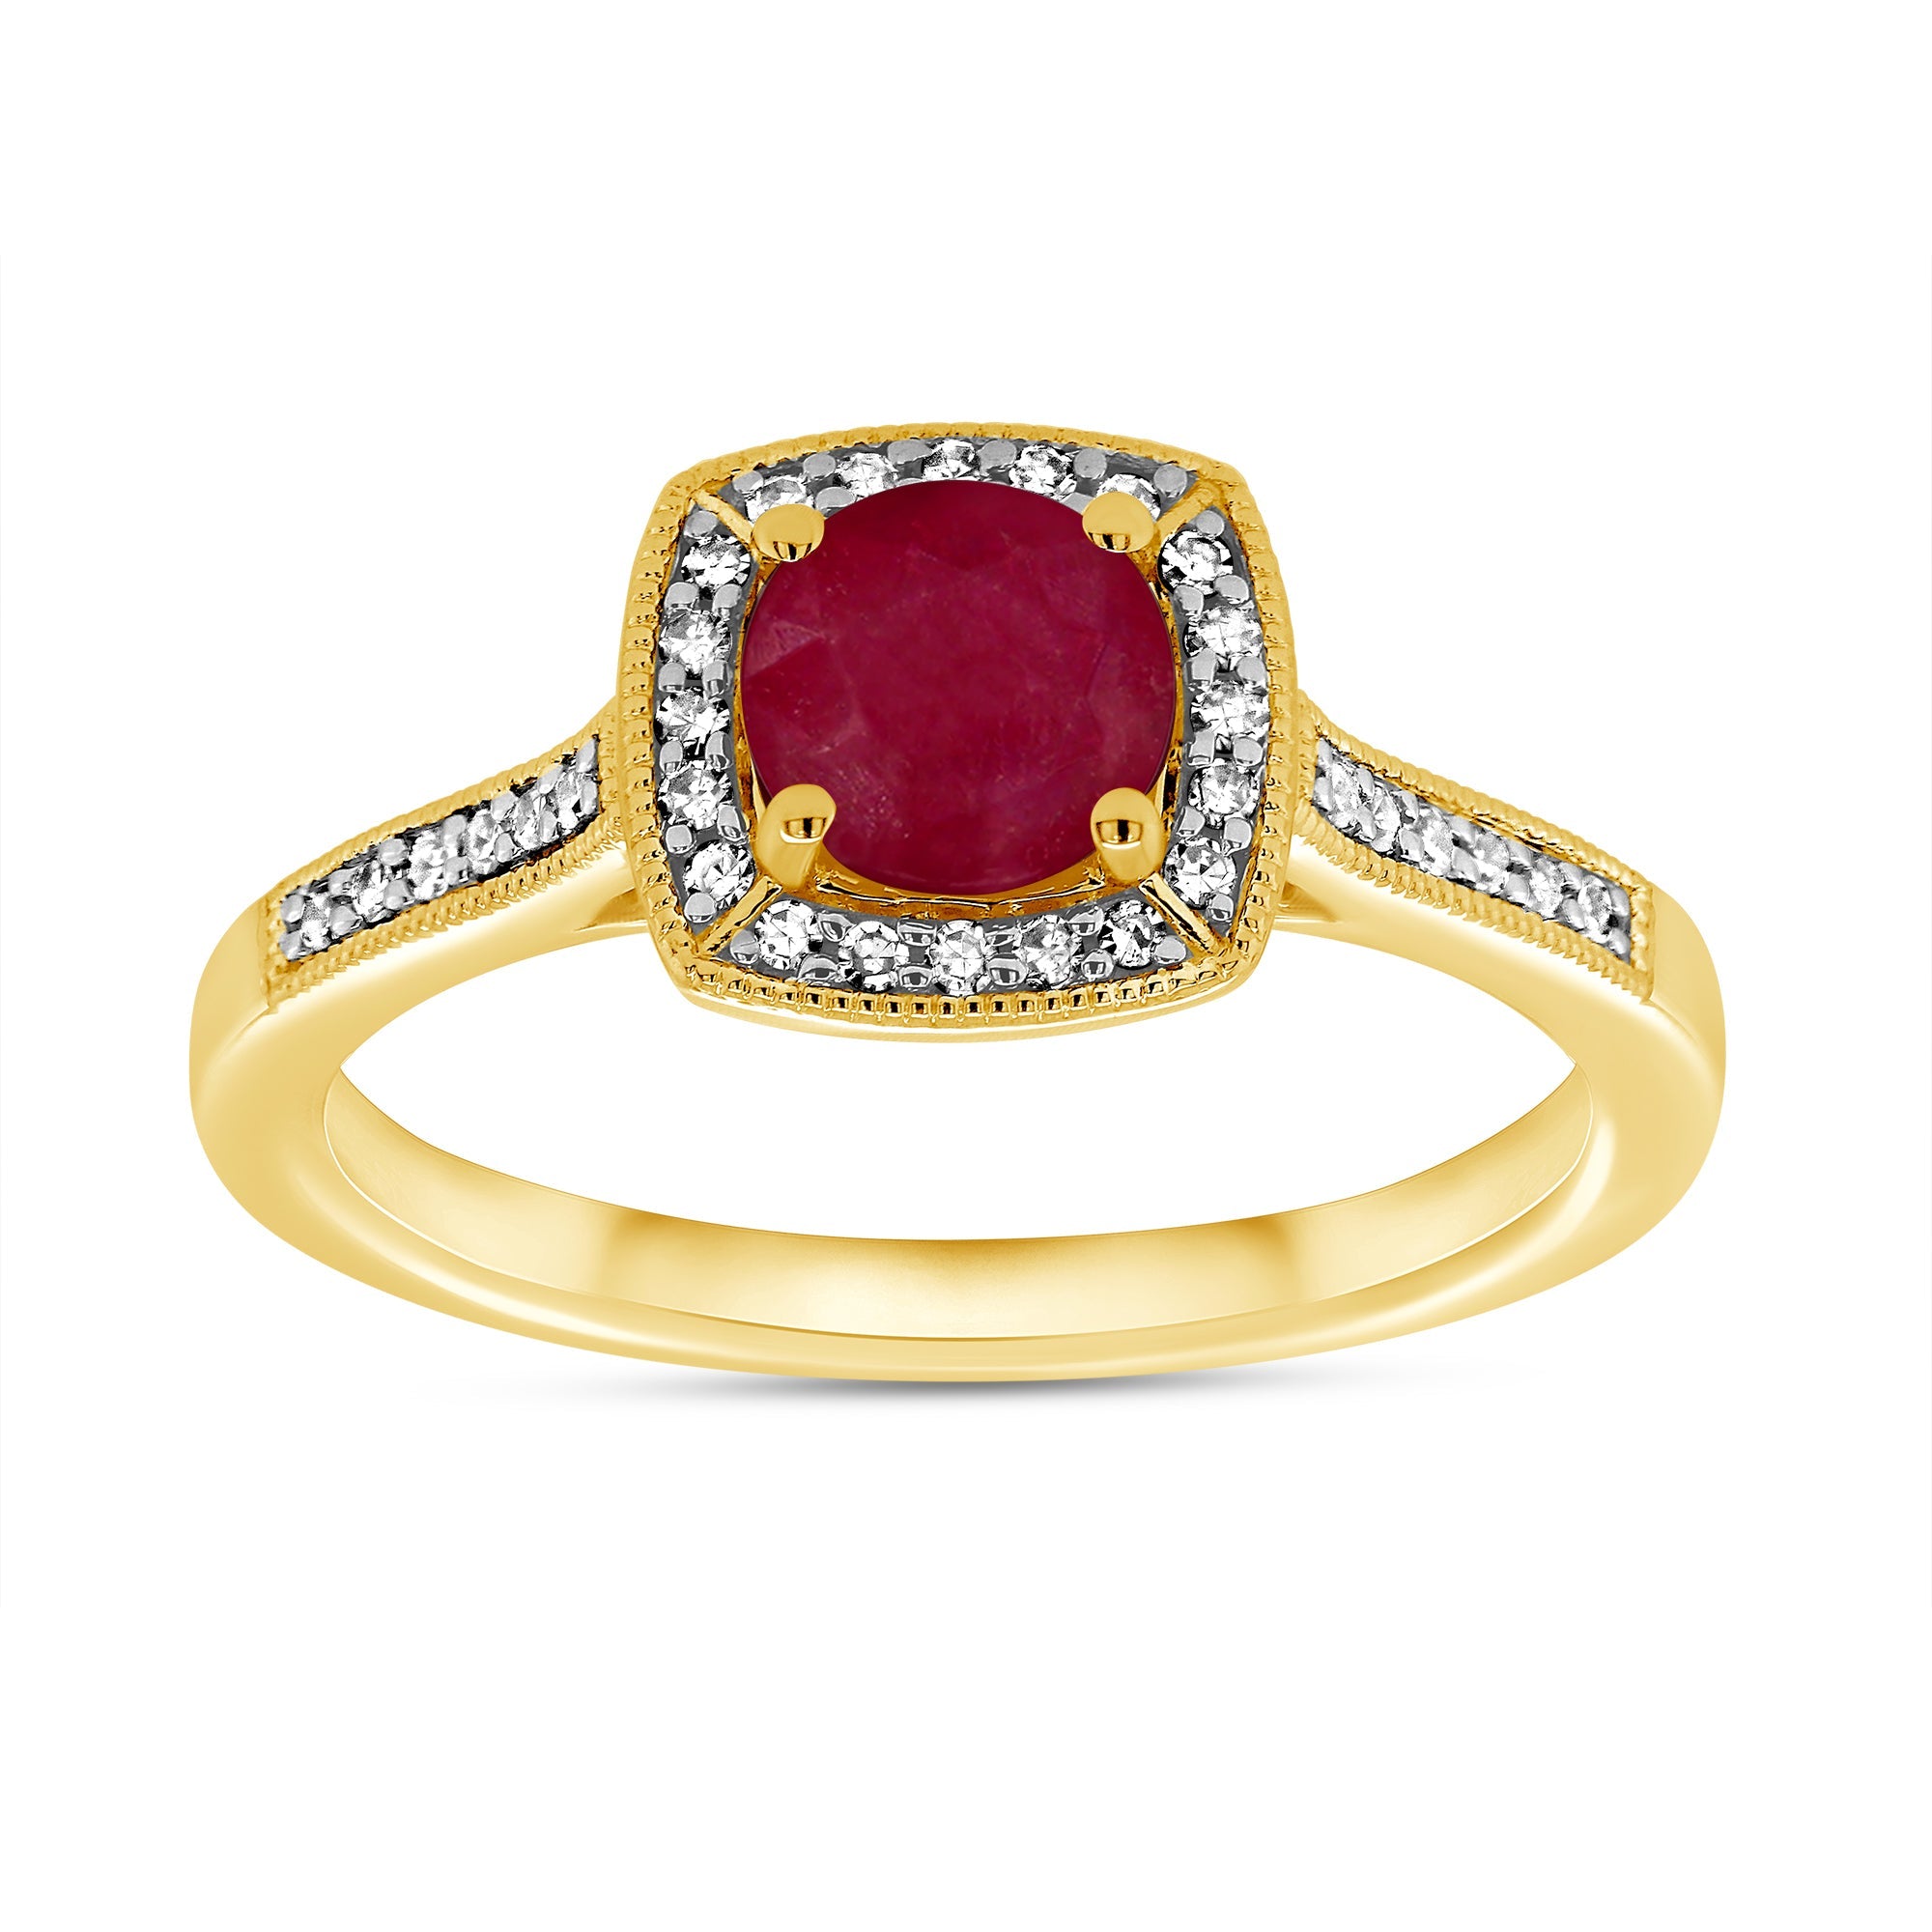 9ct gold 5mm round ruby & diamond cluster ring with diamond set shoulders 0.17ct